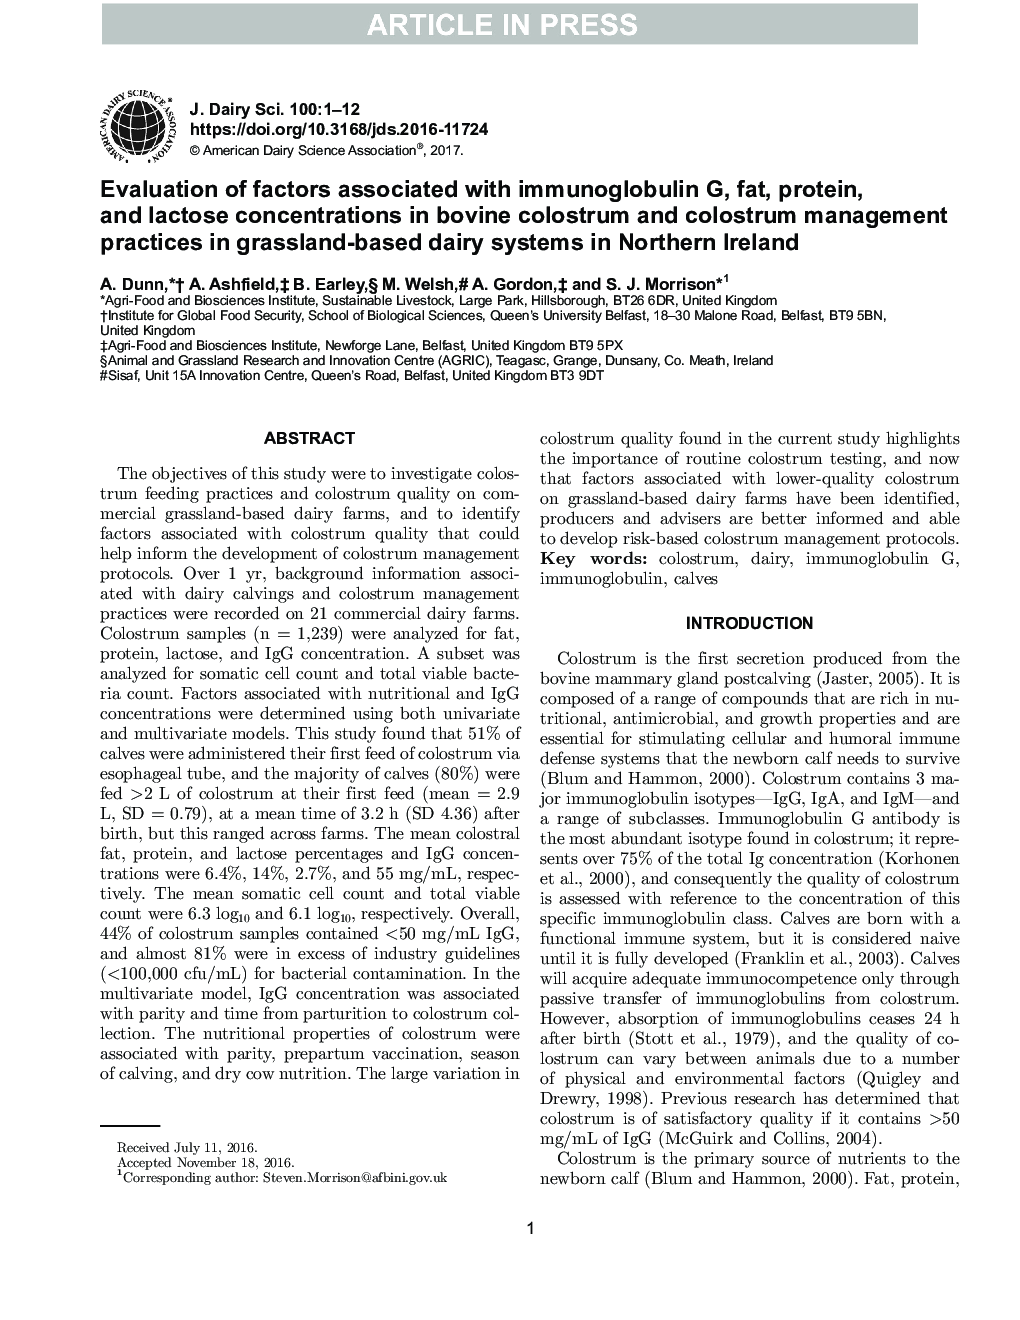 Evaluation of factors associated with immunoglobulin G, fat, protein, and lactose concentrations in bovine colostrum and colostrum management practices in grassland-based dairy systems in Northern Ireland